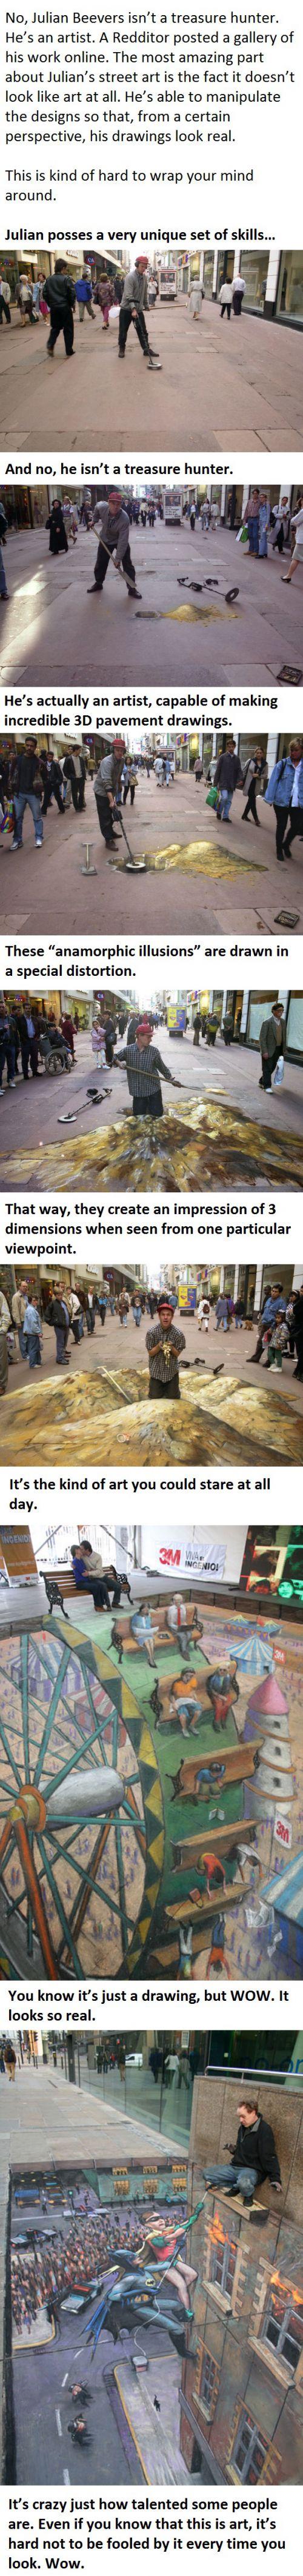 My tiny brain just exploded. This is unbelievable... -   Misc